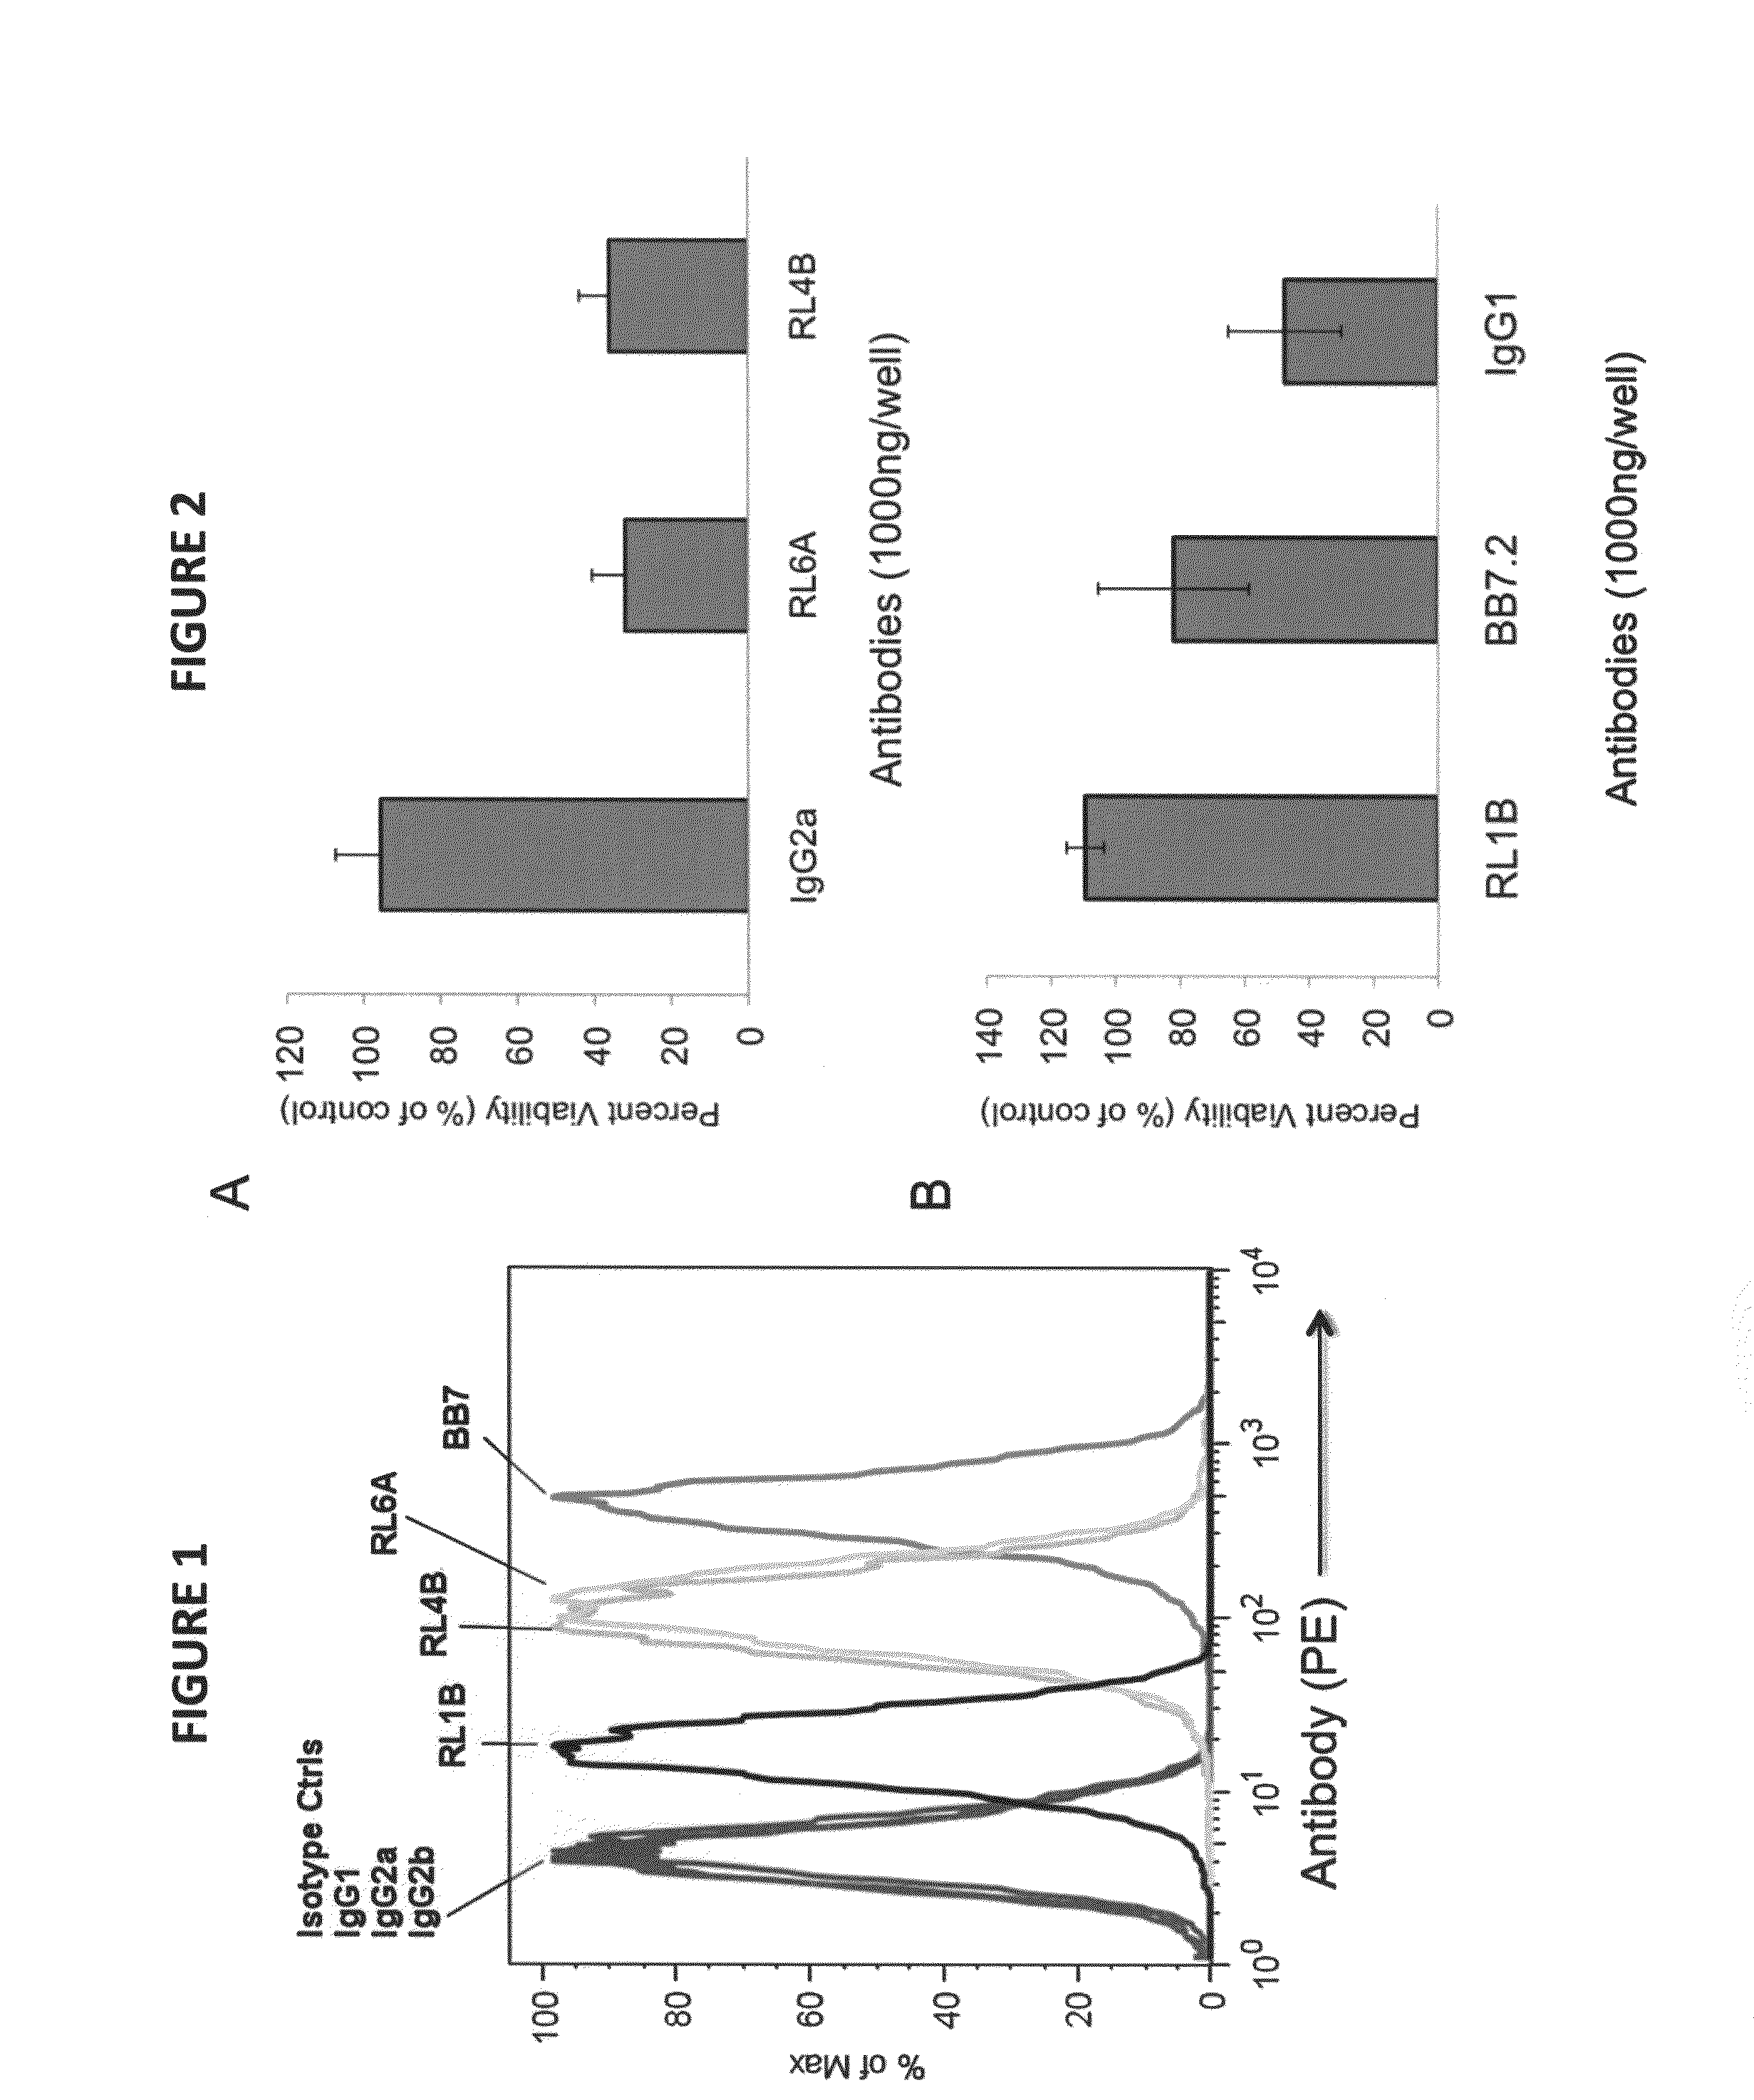 Antibodies as T cell receptor mimics, methods of production and uses thereof